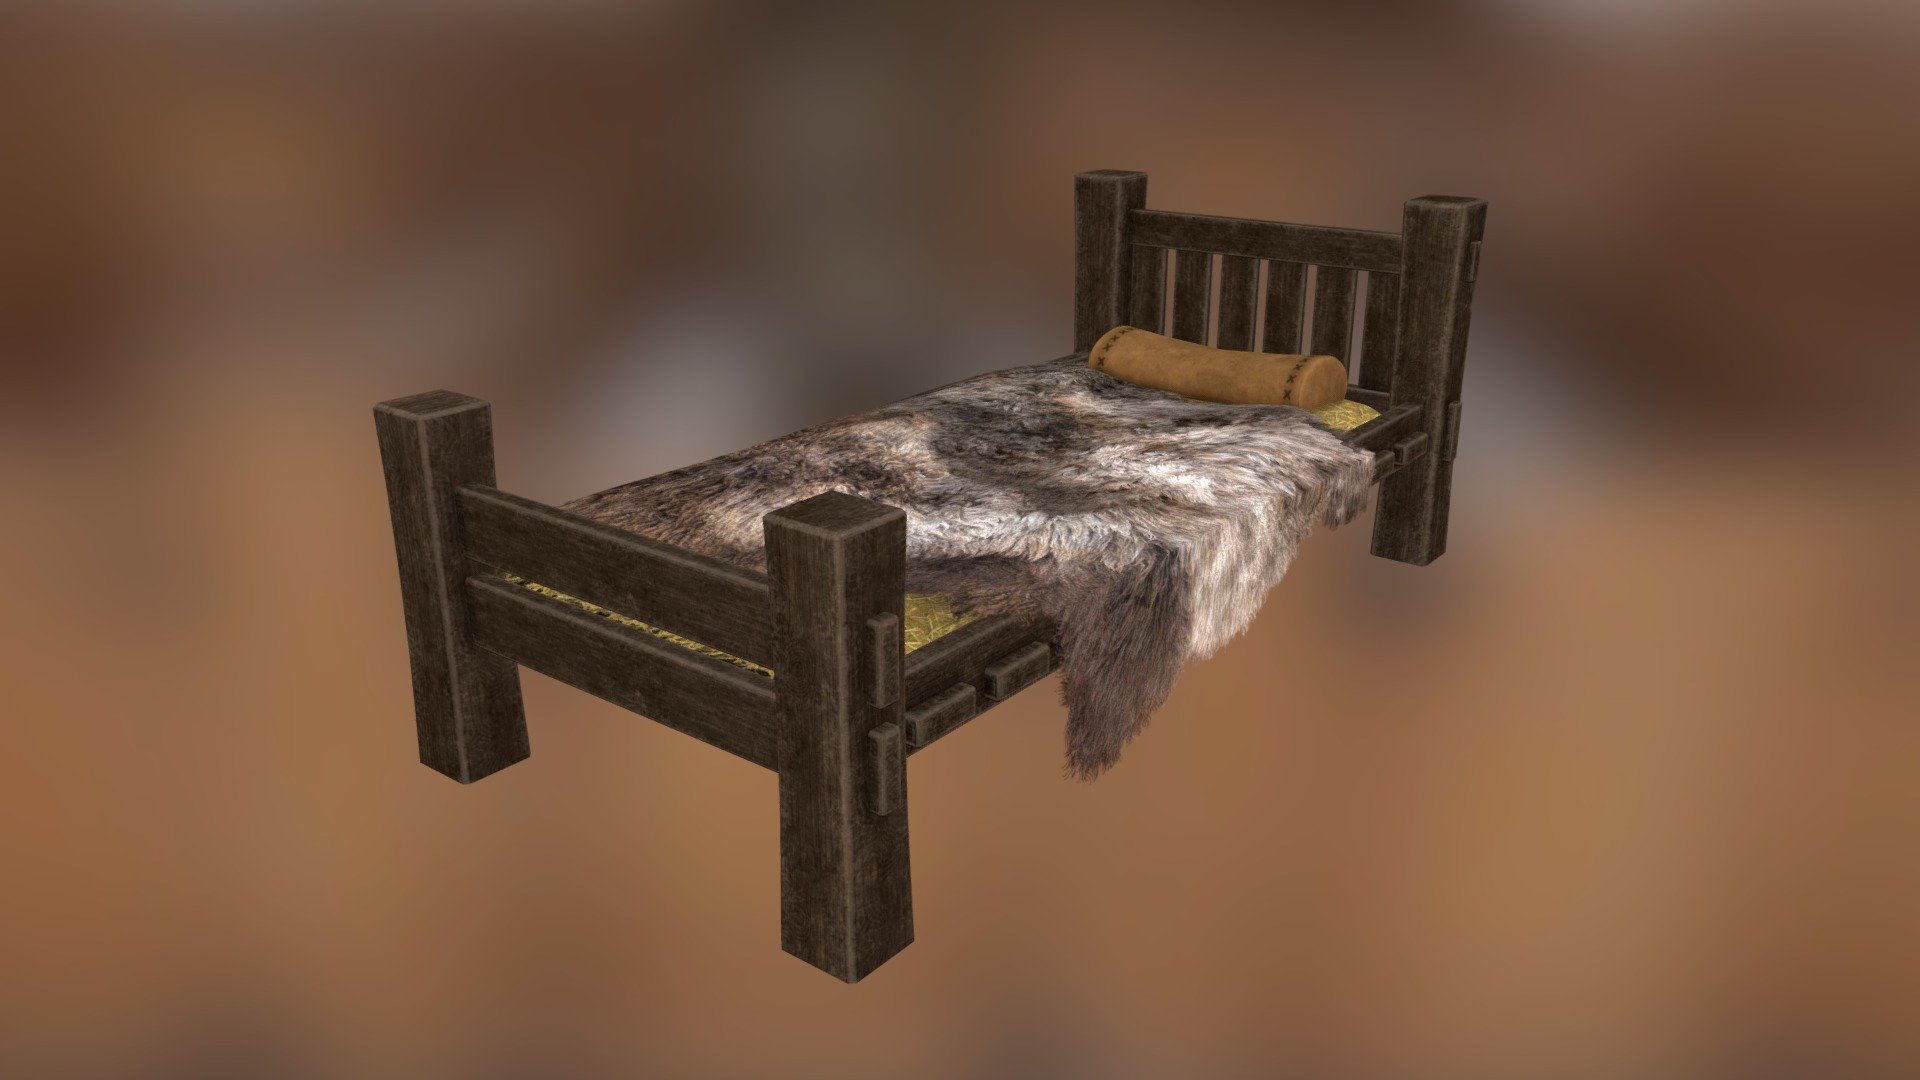 A peasant's bed consisting of old, dark wood. The wood and pillow texturing were done with Substance Painter. Everything else is a combination of photo sourcing and hand painting with Photoshop. I spent way too long on this model, but it's done at last 3d model